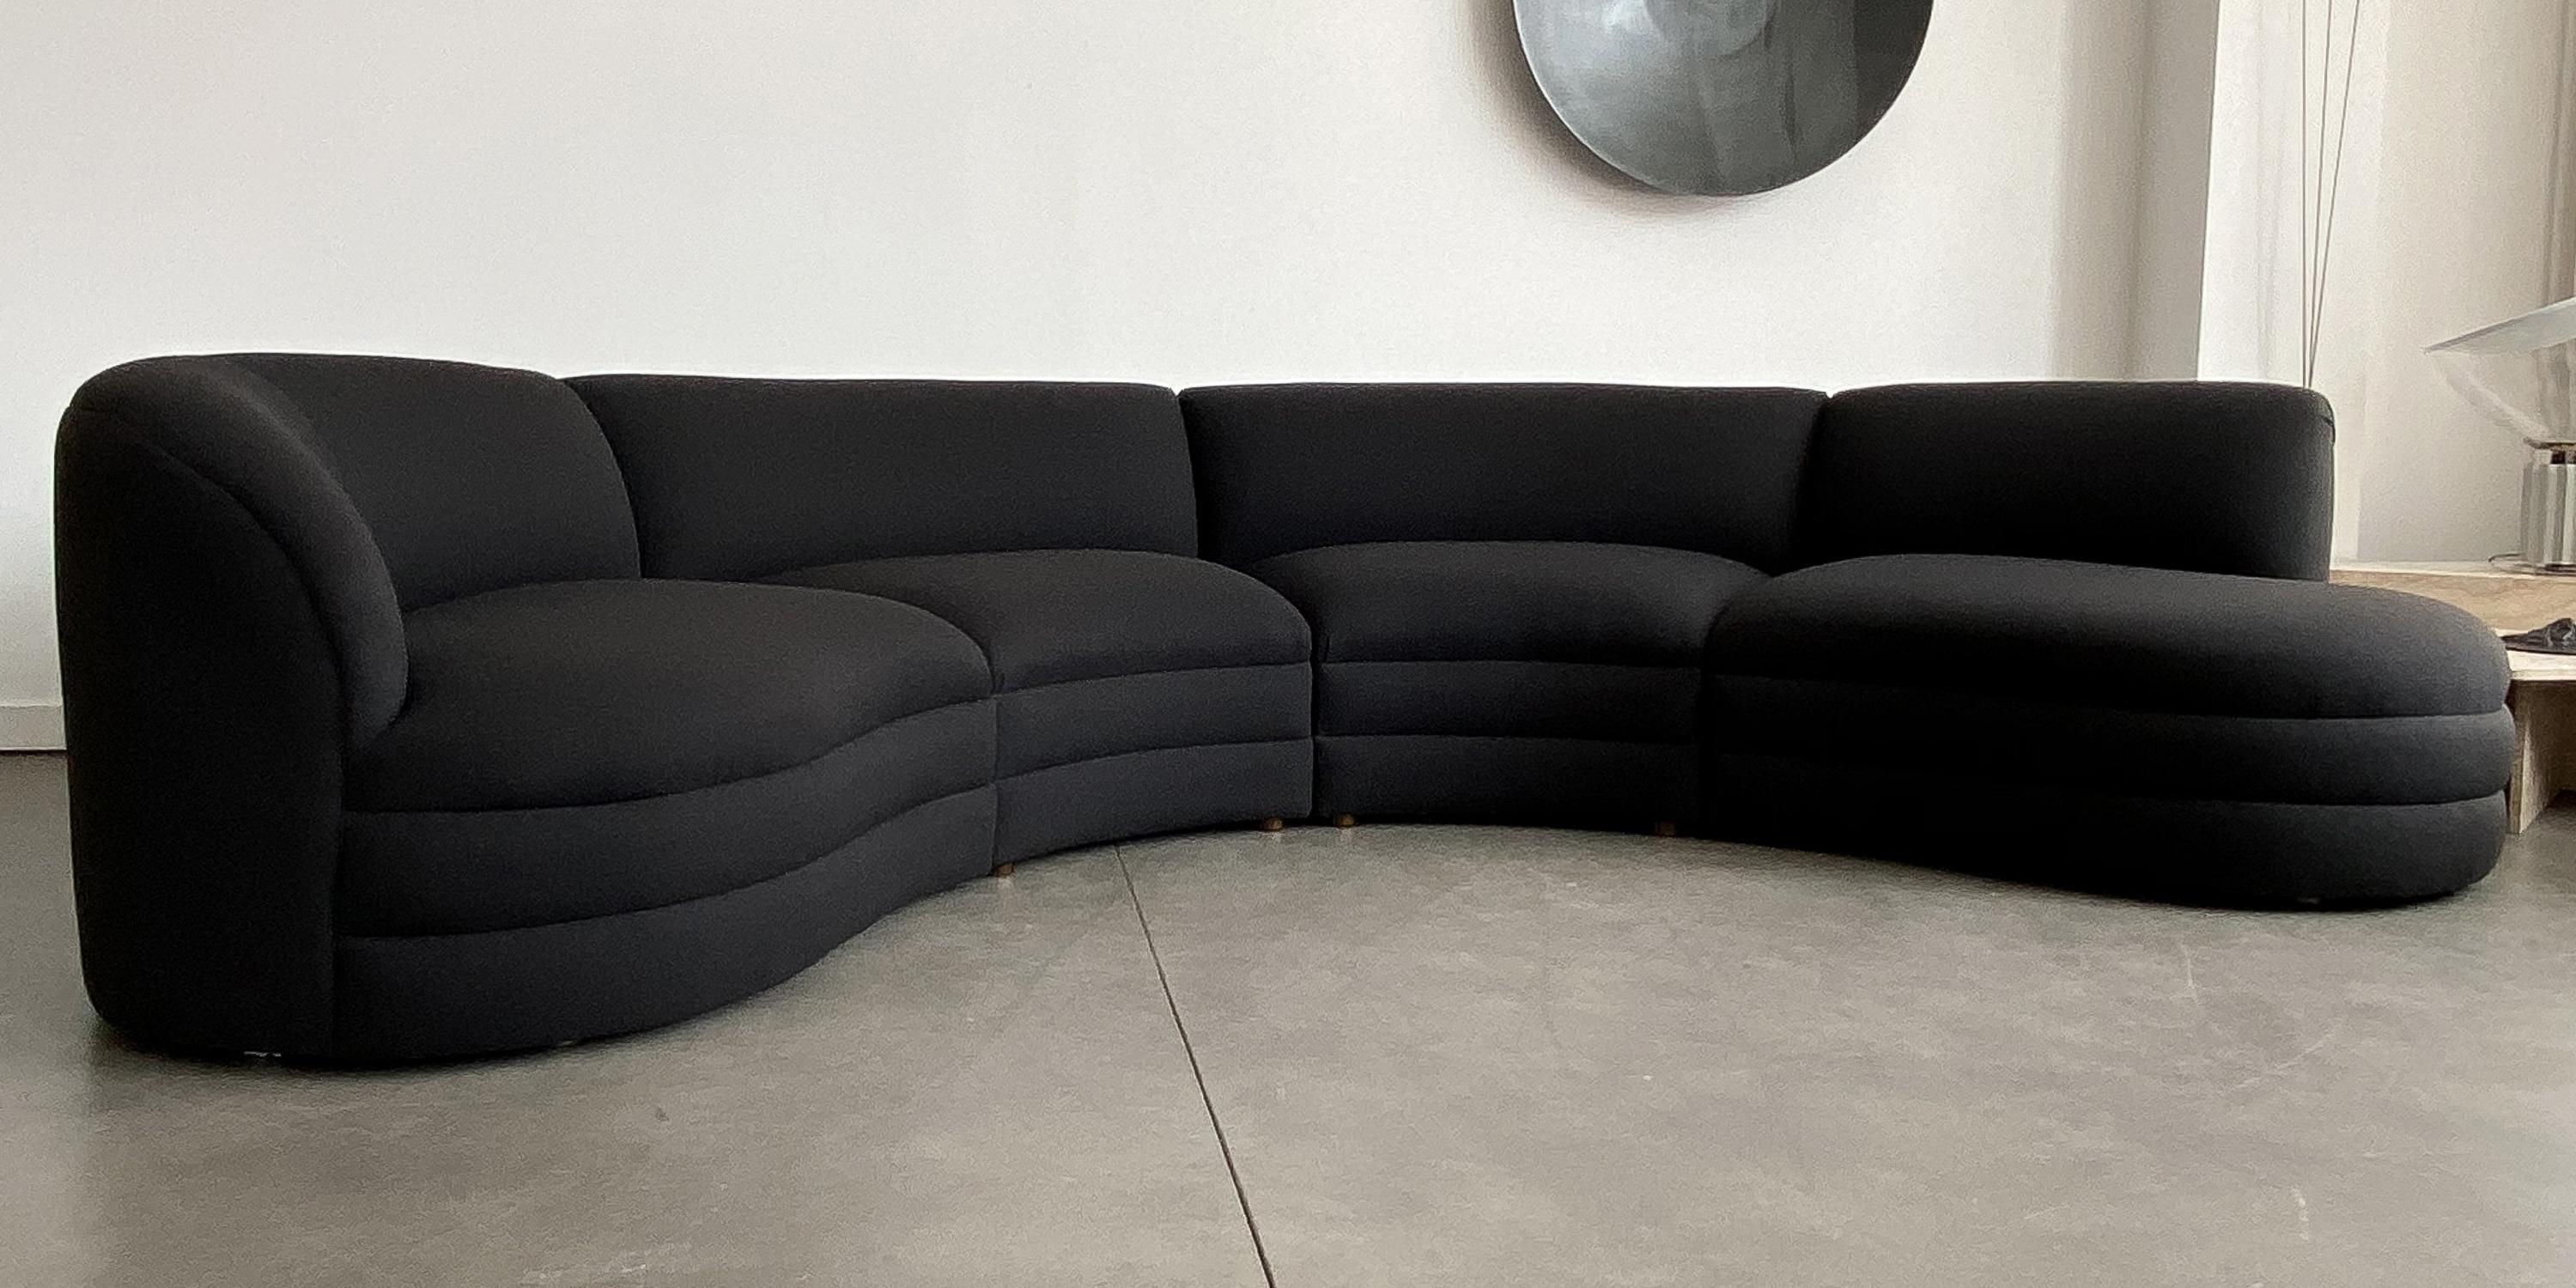 American Four Piece Curved Sectional Sofa Attributed to Vladimir Kagan